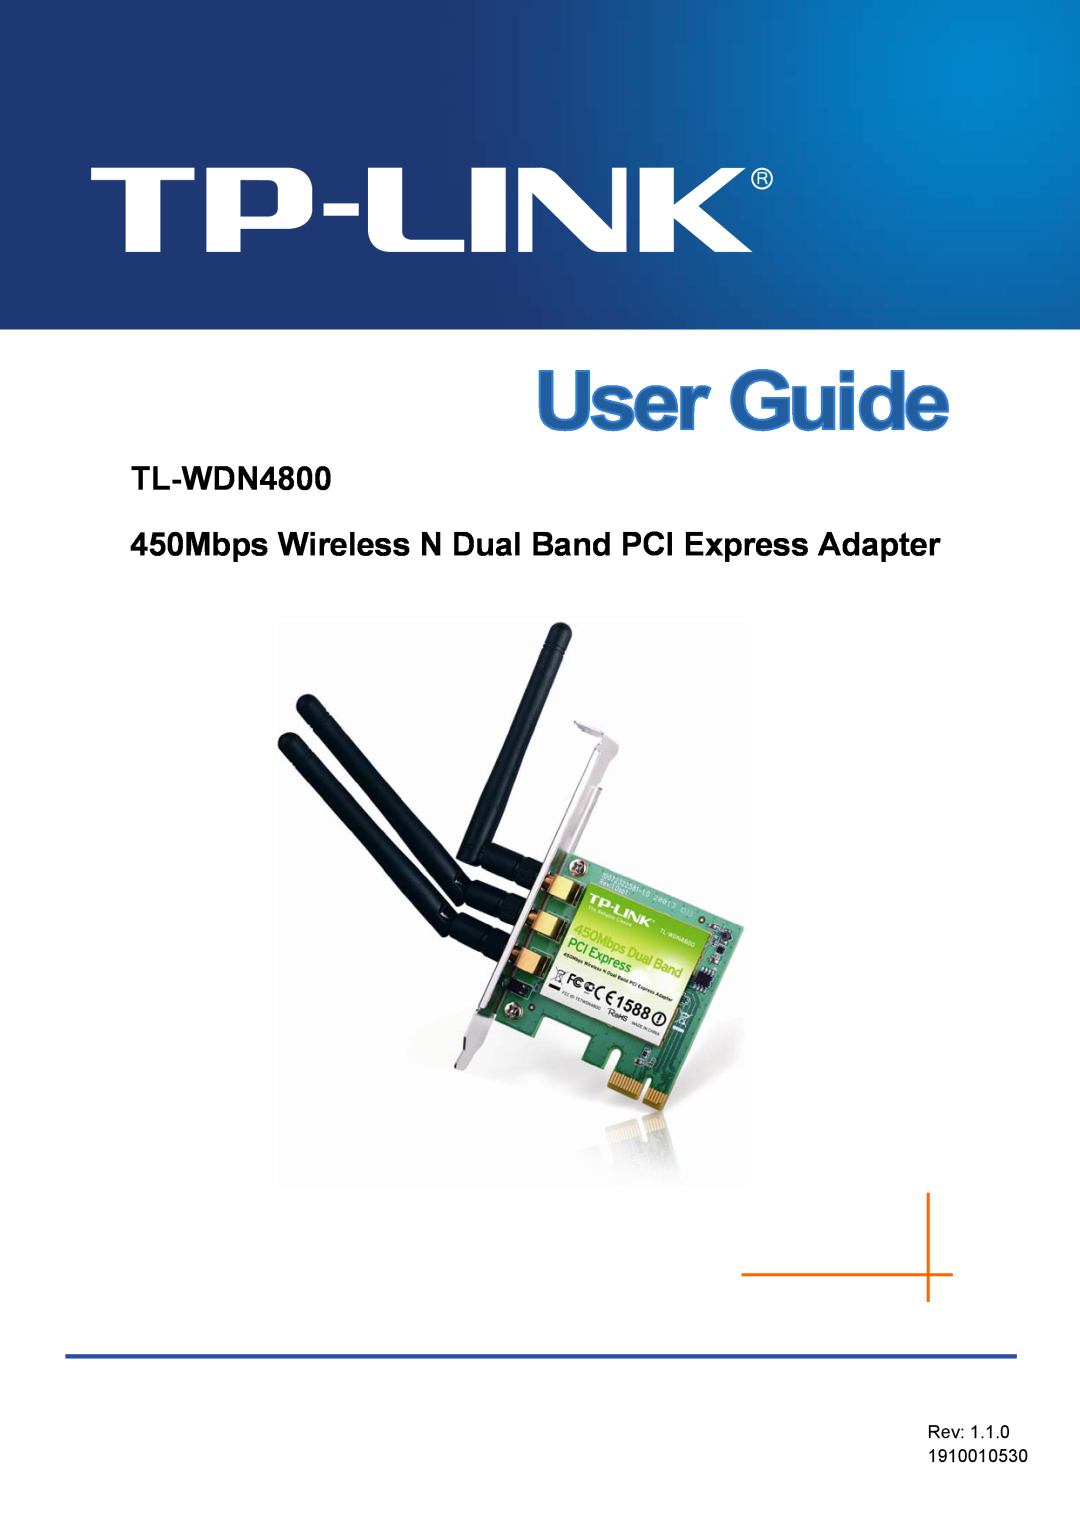 TP-Link manual TL-WDN4800 450Mbps Wireless N Dual Band PCI Express Adapter, Rev 1.1.0 